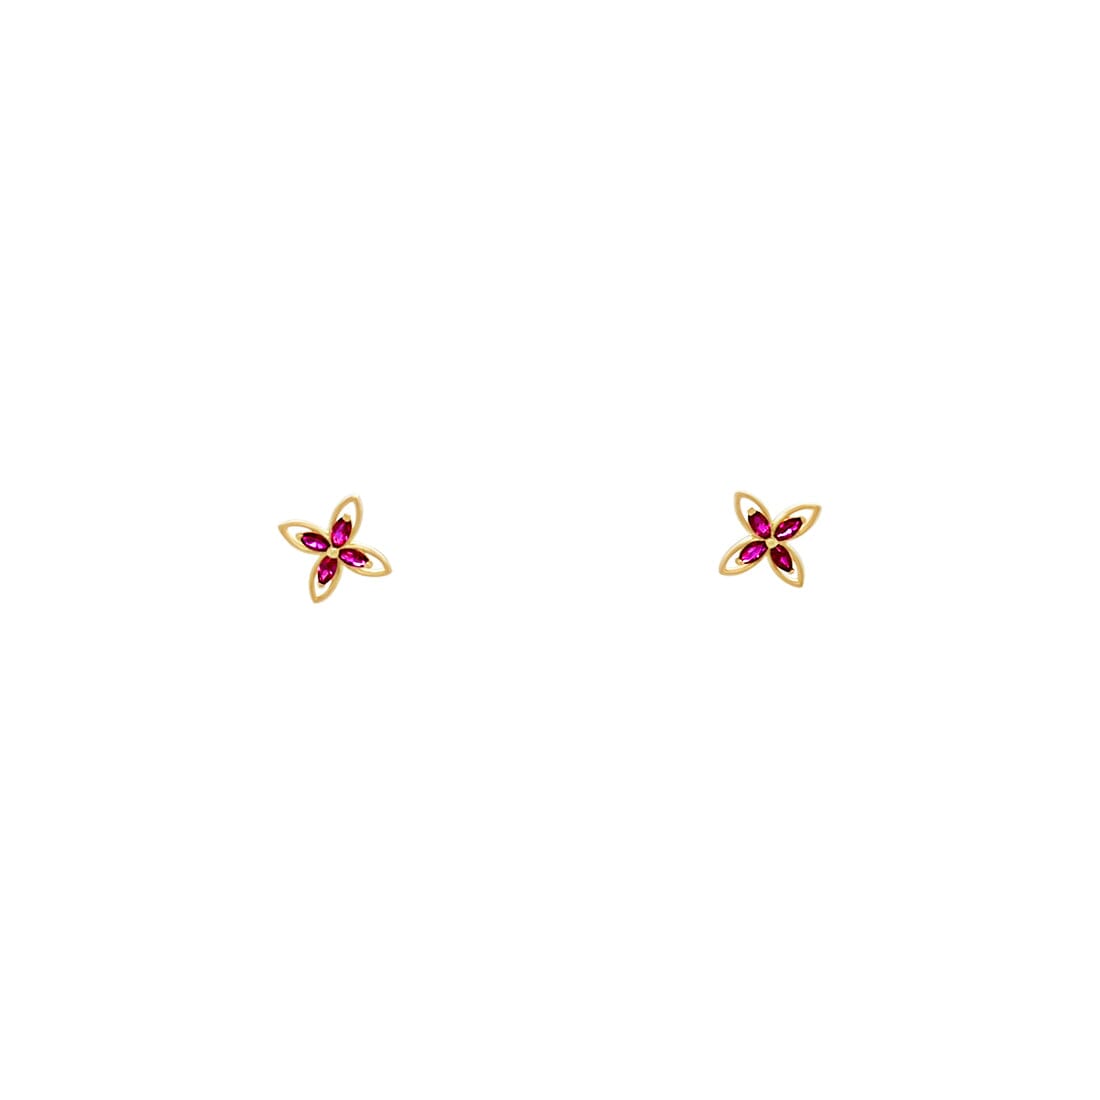 4 Leaf Flower Stud Earrings with Cubic Zirconia in 9ct Yellow Gold Earrings Bevilles 